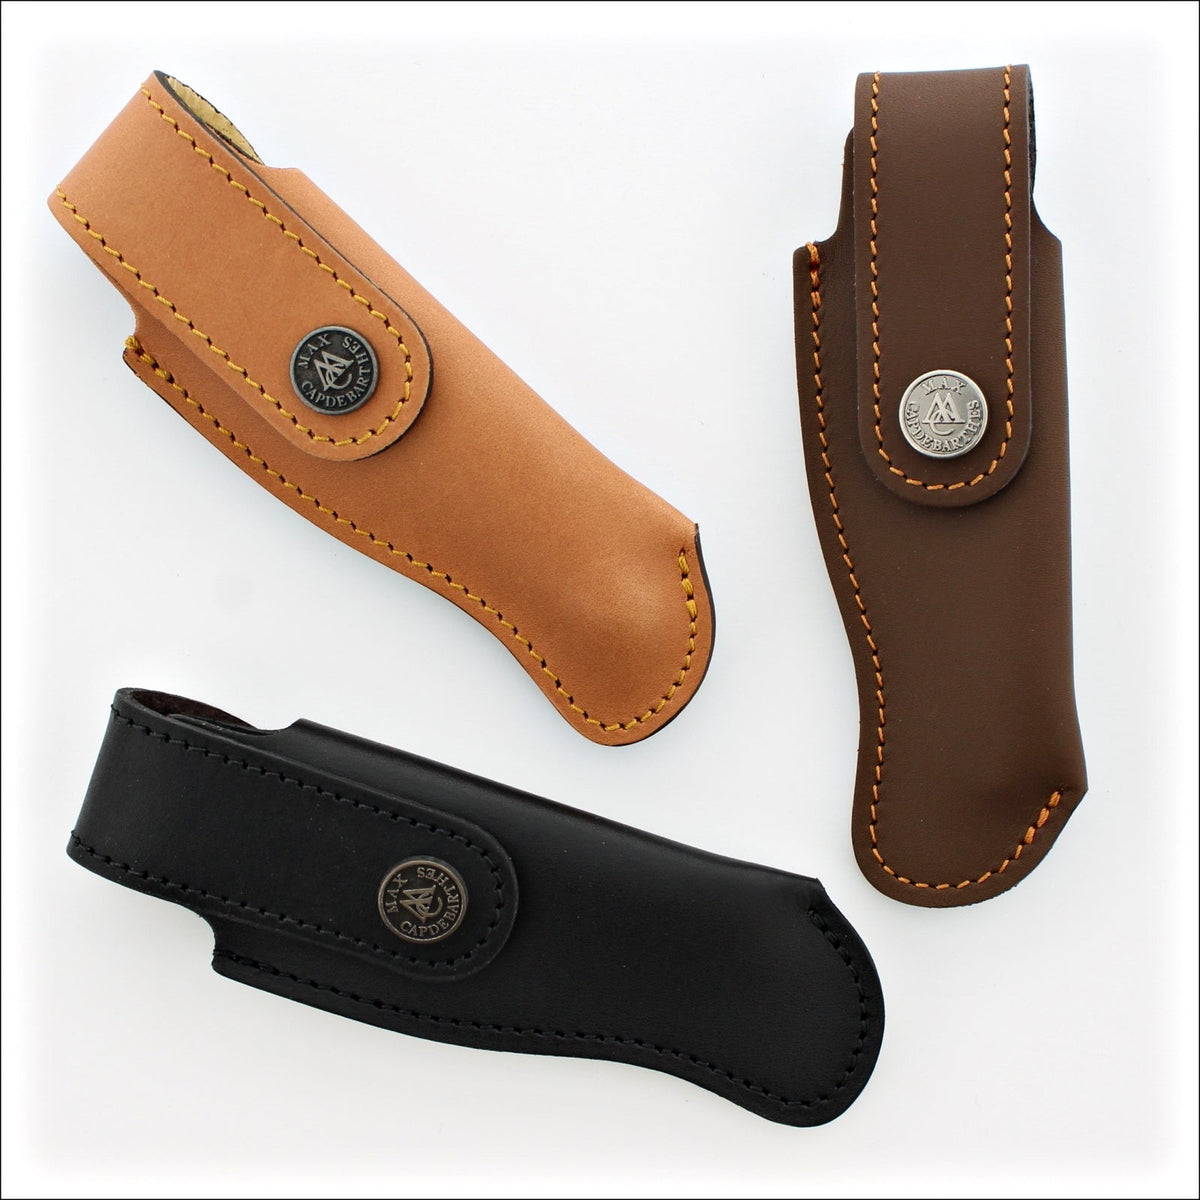 Laguiole Thiers Desy Leather Sheath for 12 cm Pocket Knives